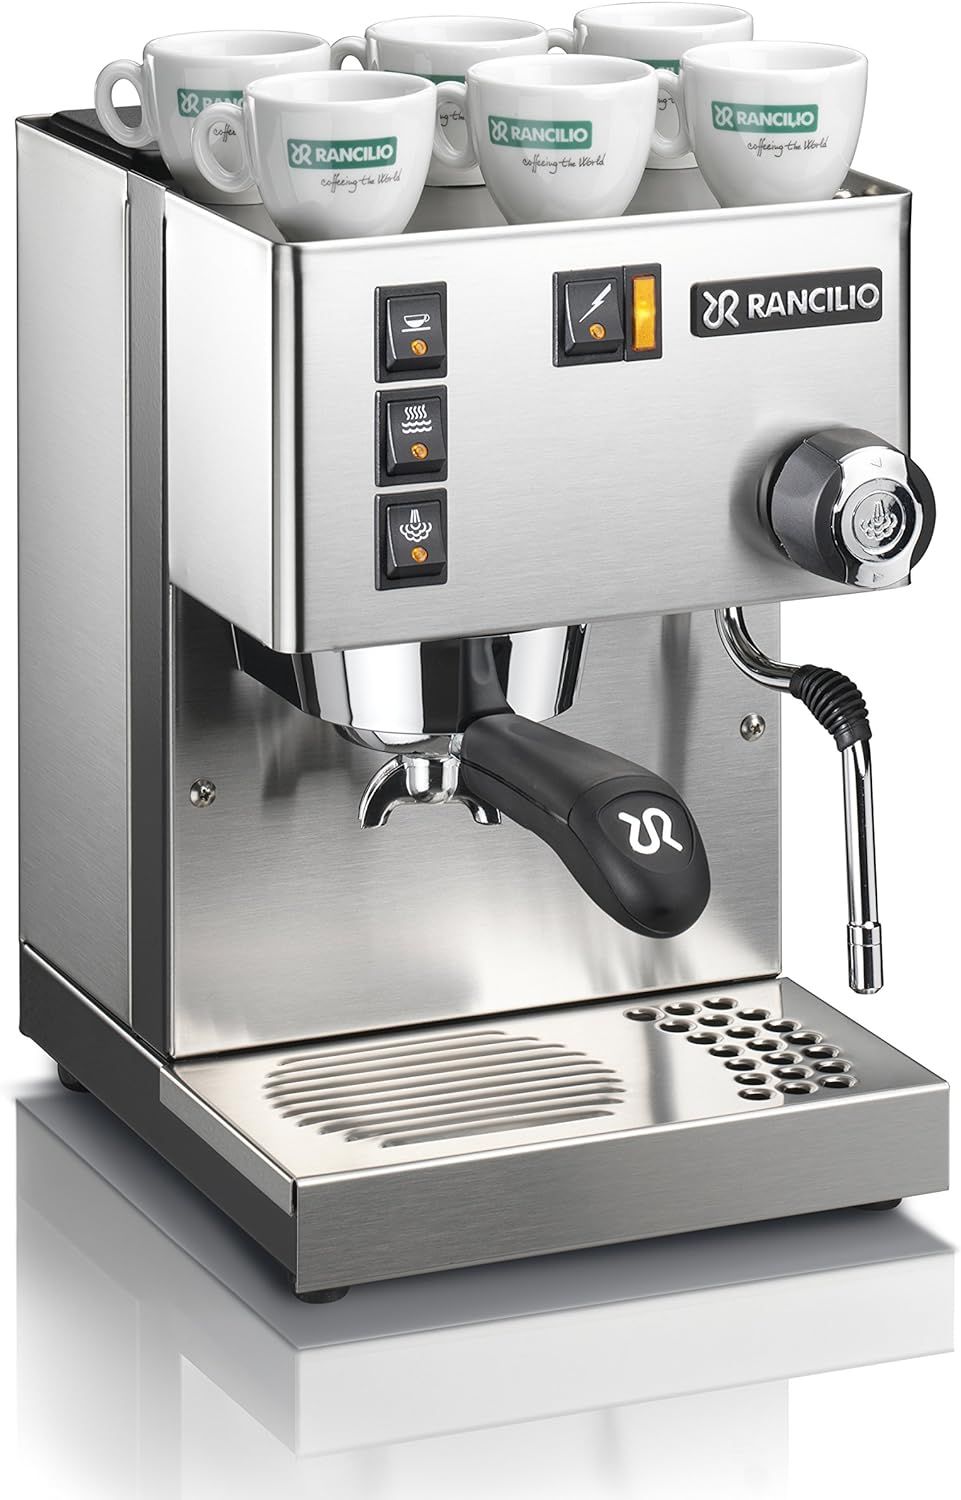 Rancilio Silvia Espresso Machine with Iron Frame and Stainless Steel Side Panels, 11.4 by 13.4-Inch | Amazon (US)